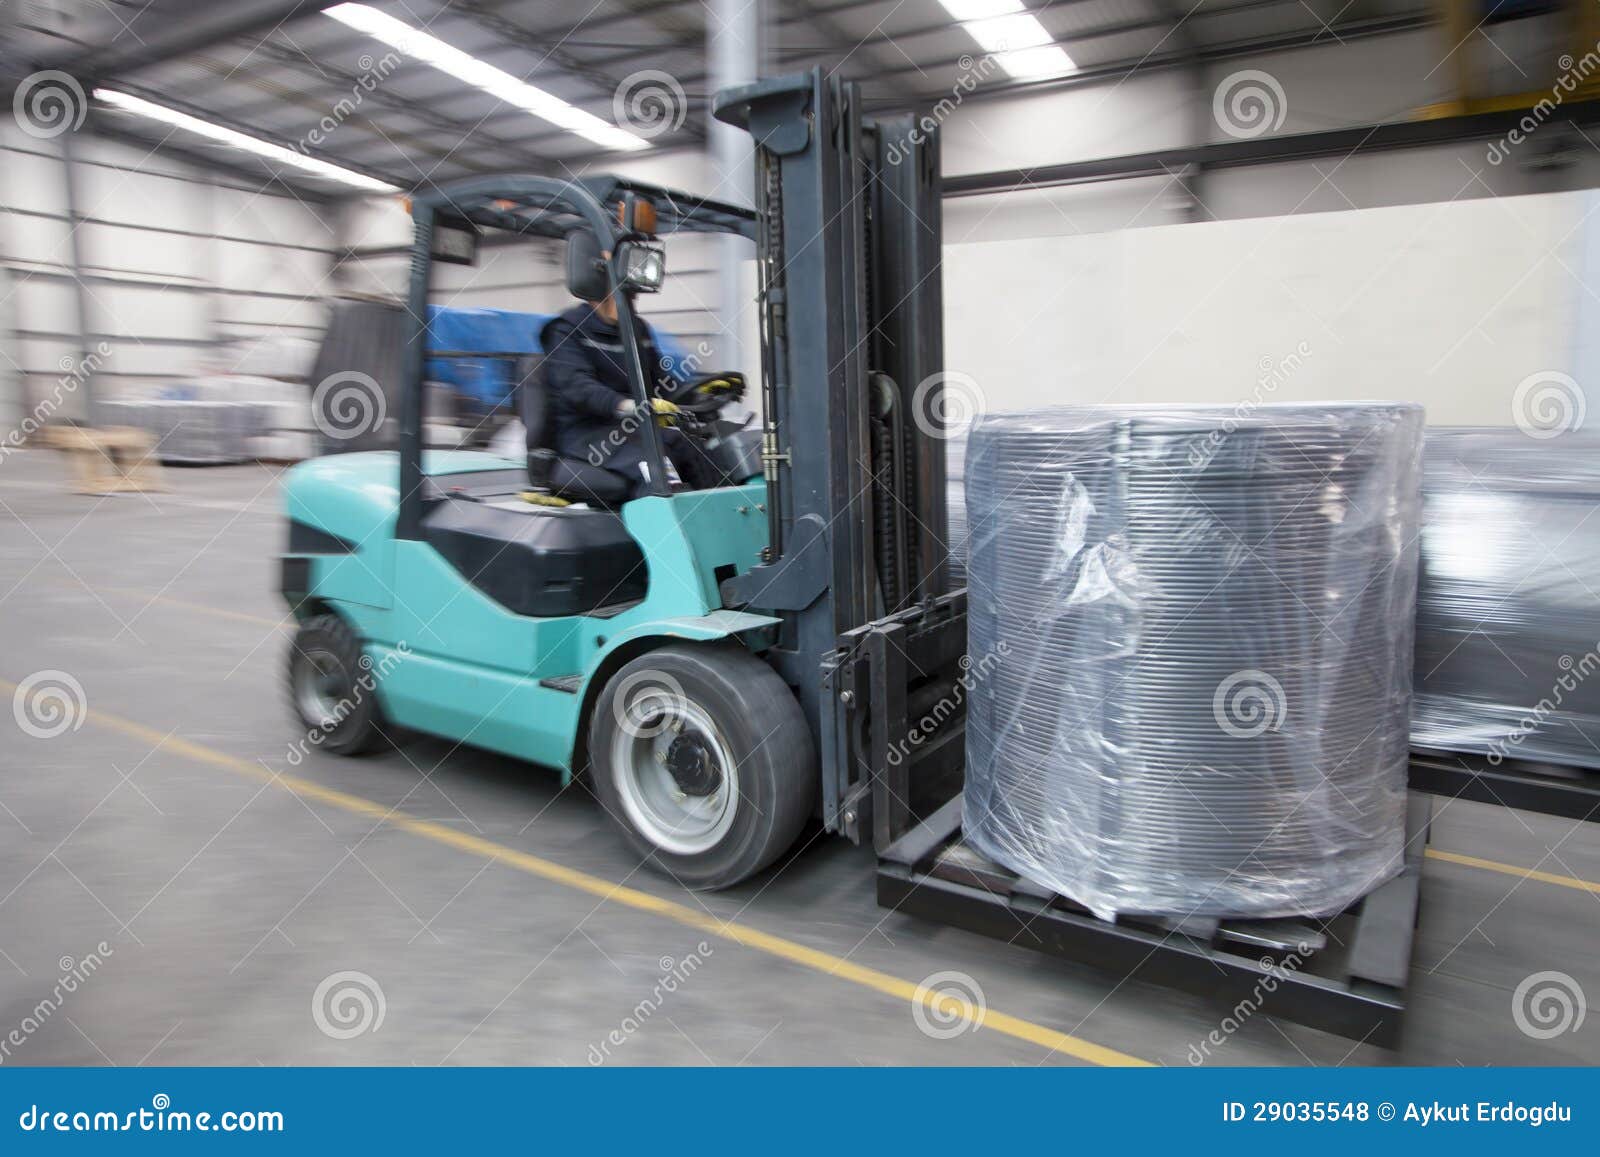 forklift carrying cargo